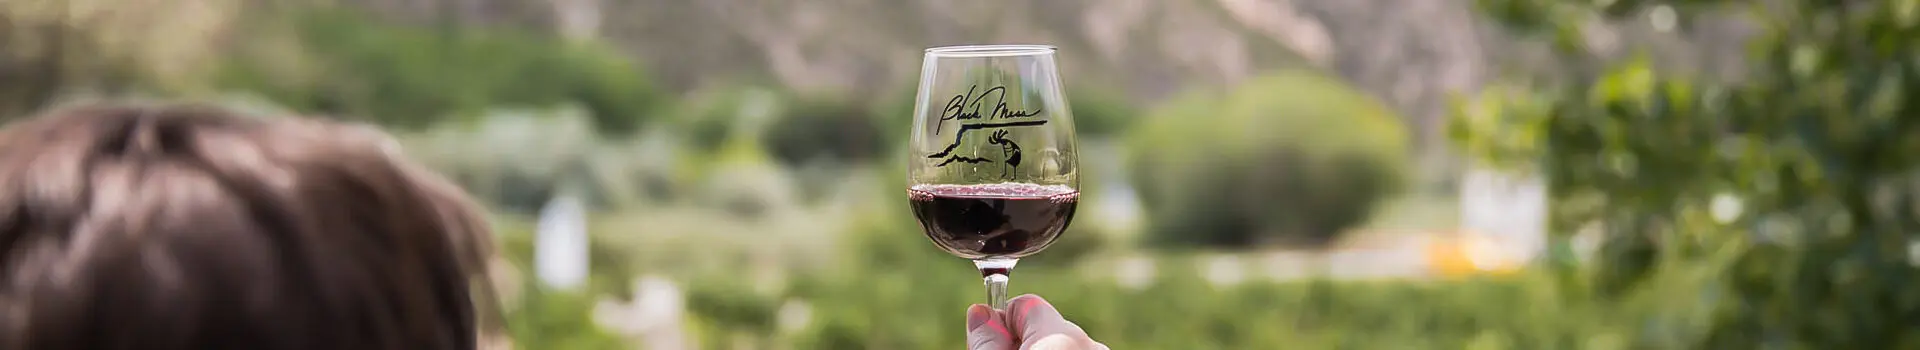 A Glass of wine being held in a vineyard